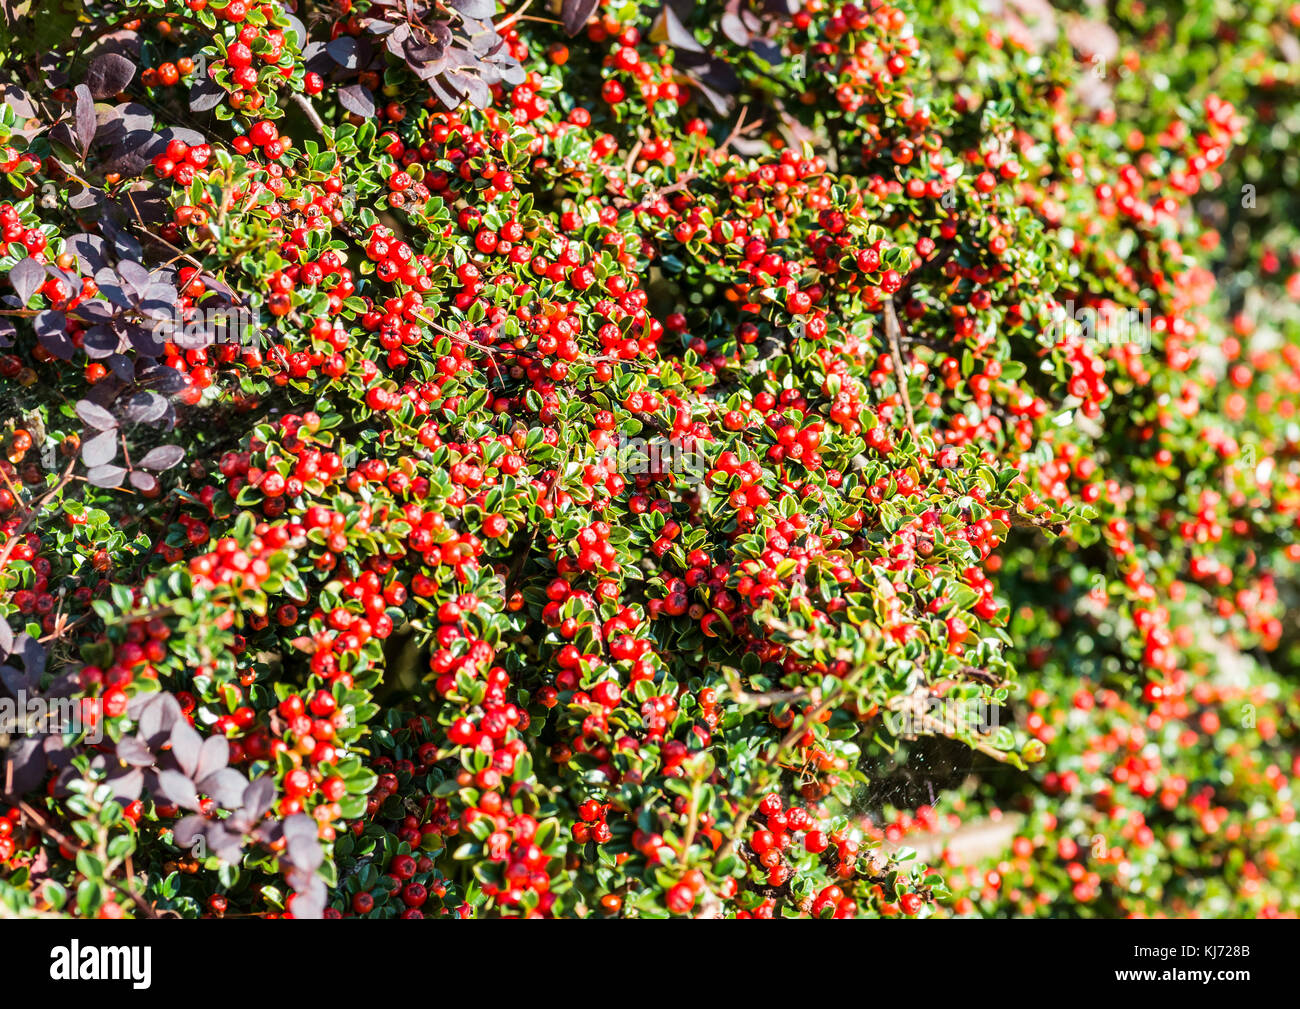 A shot of the red berries of a cotoneaster bush. Stock Photo